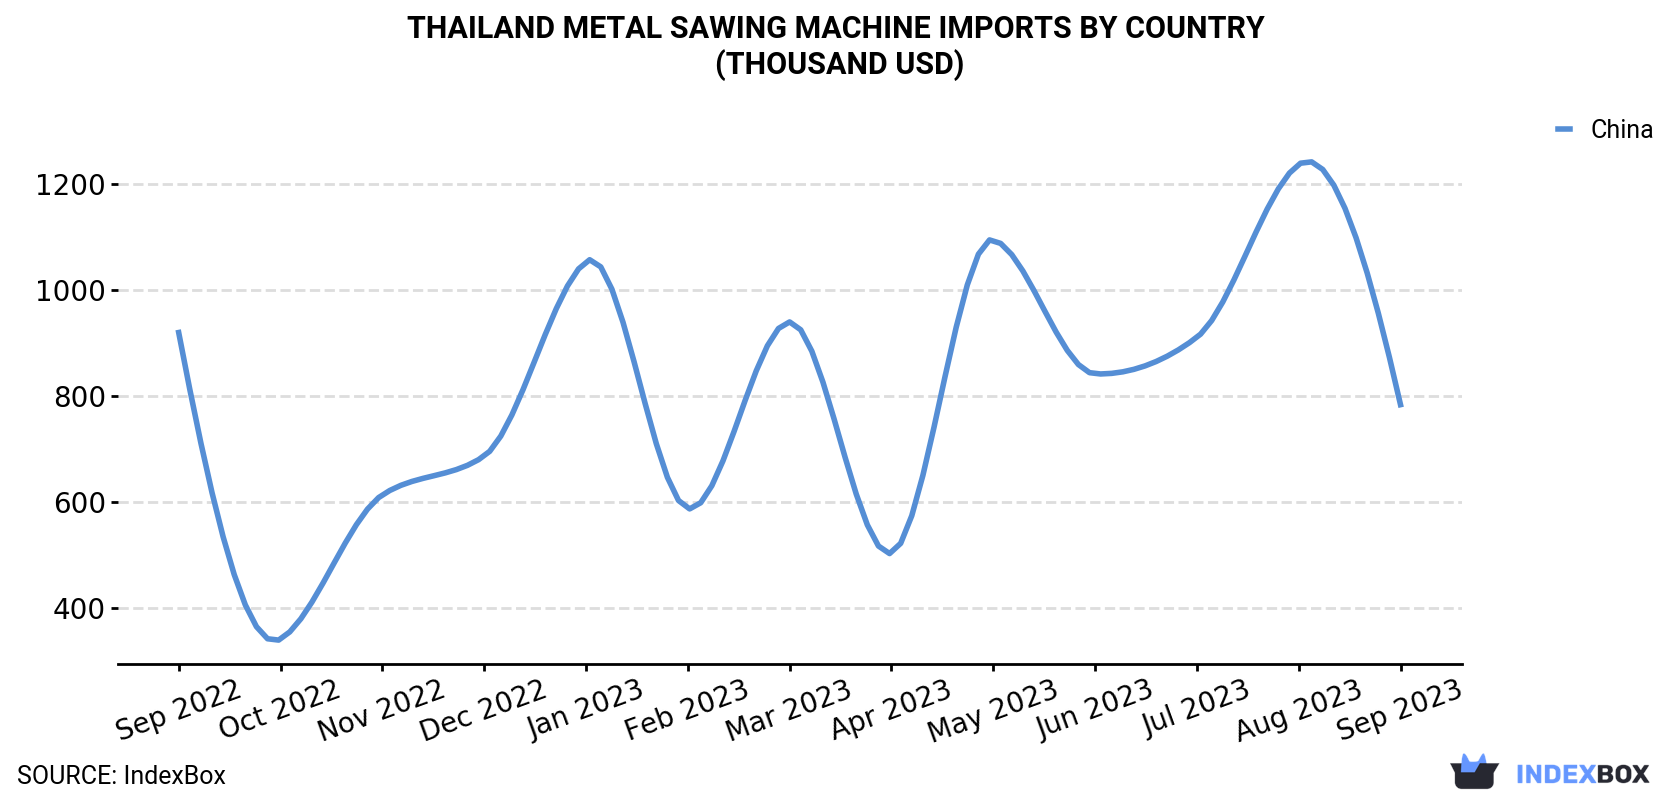 Thailand Metal Sawing Machine Imports By Country (Thousand USD)